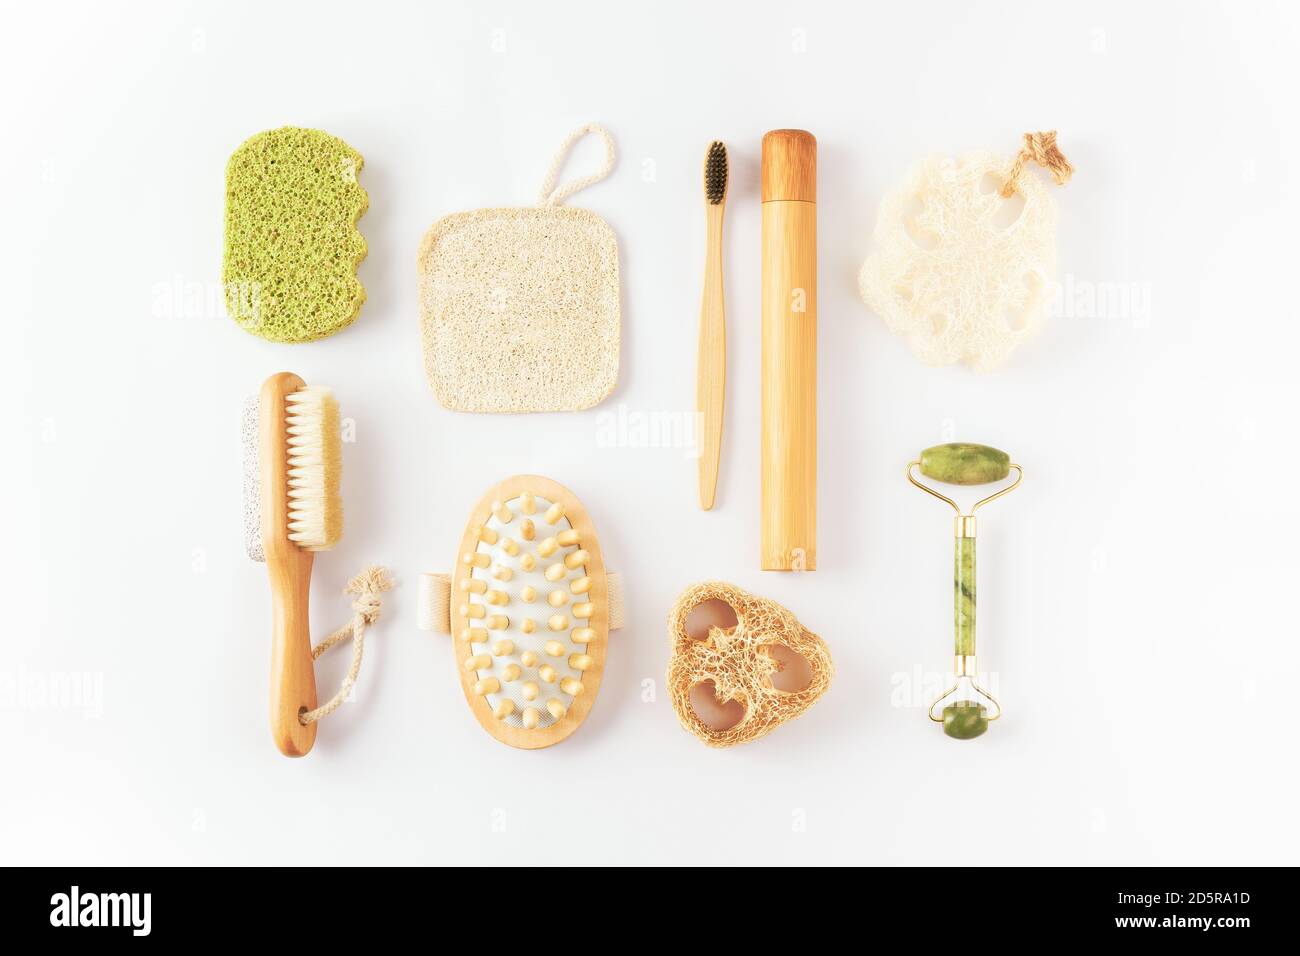 Ecology, zero waste concept. Reusable items for beauty treatment from organic biodegradable material, quartz face roller, anti cellulite massager Stock Photo